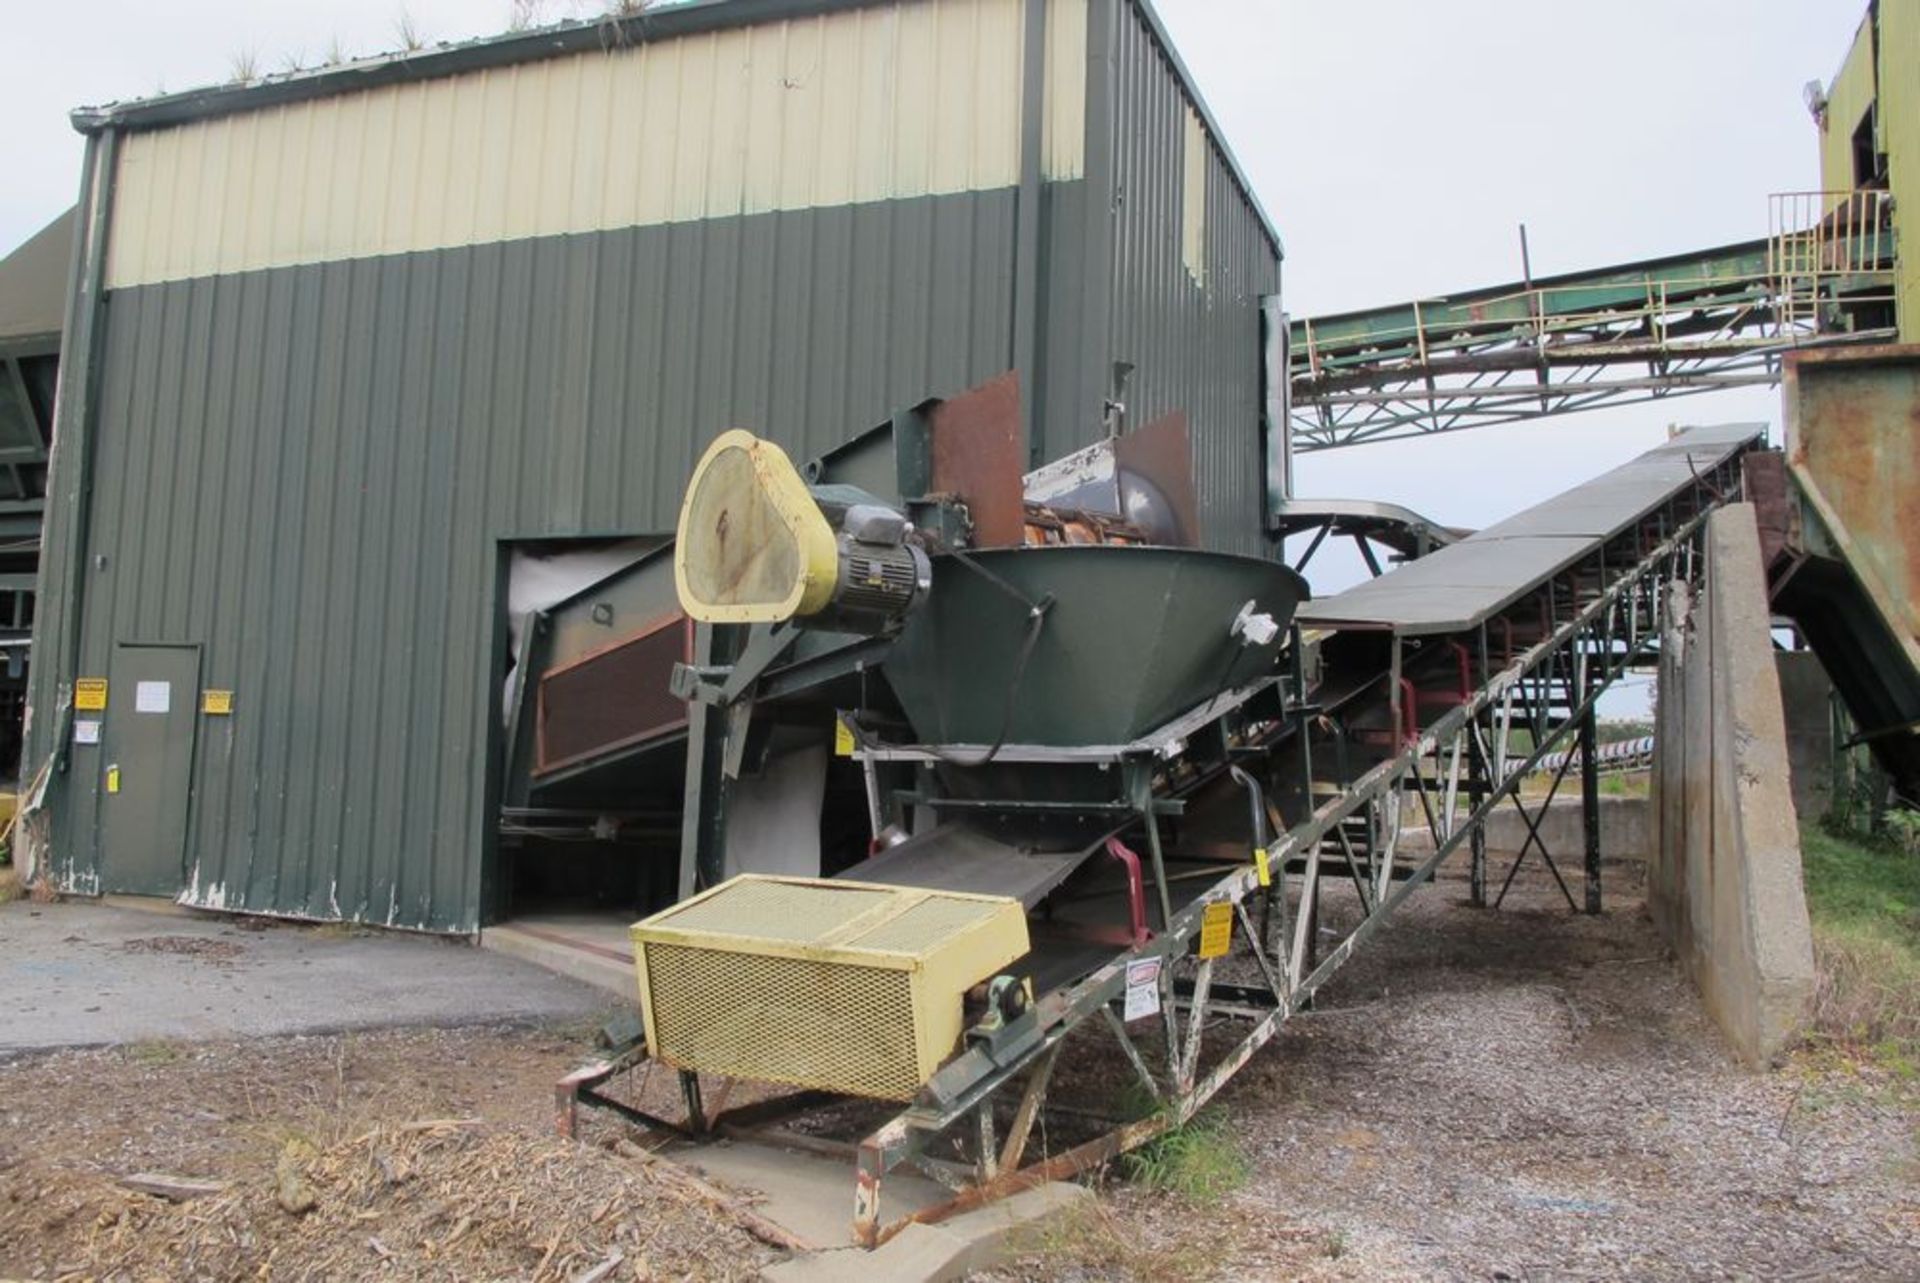 LOT OF 2 45"W INCLINE RUBBERT BELT CONVEYORS 80'L AND 120'L FROM CHIPPER BLDG TO TOP FLOOR OF WOOD